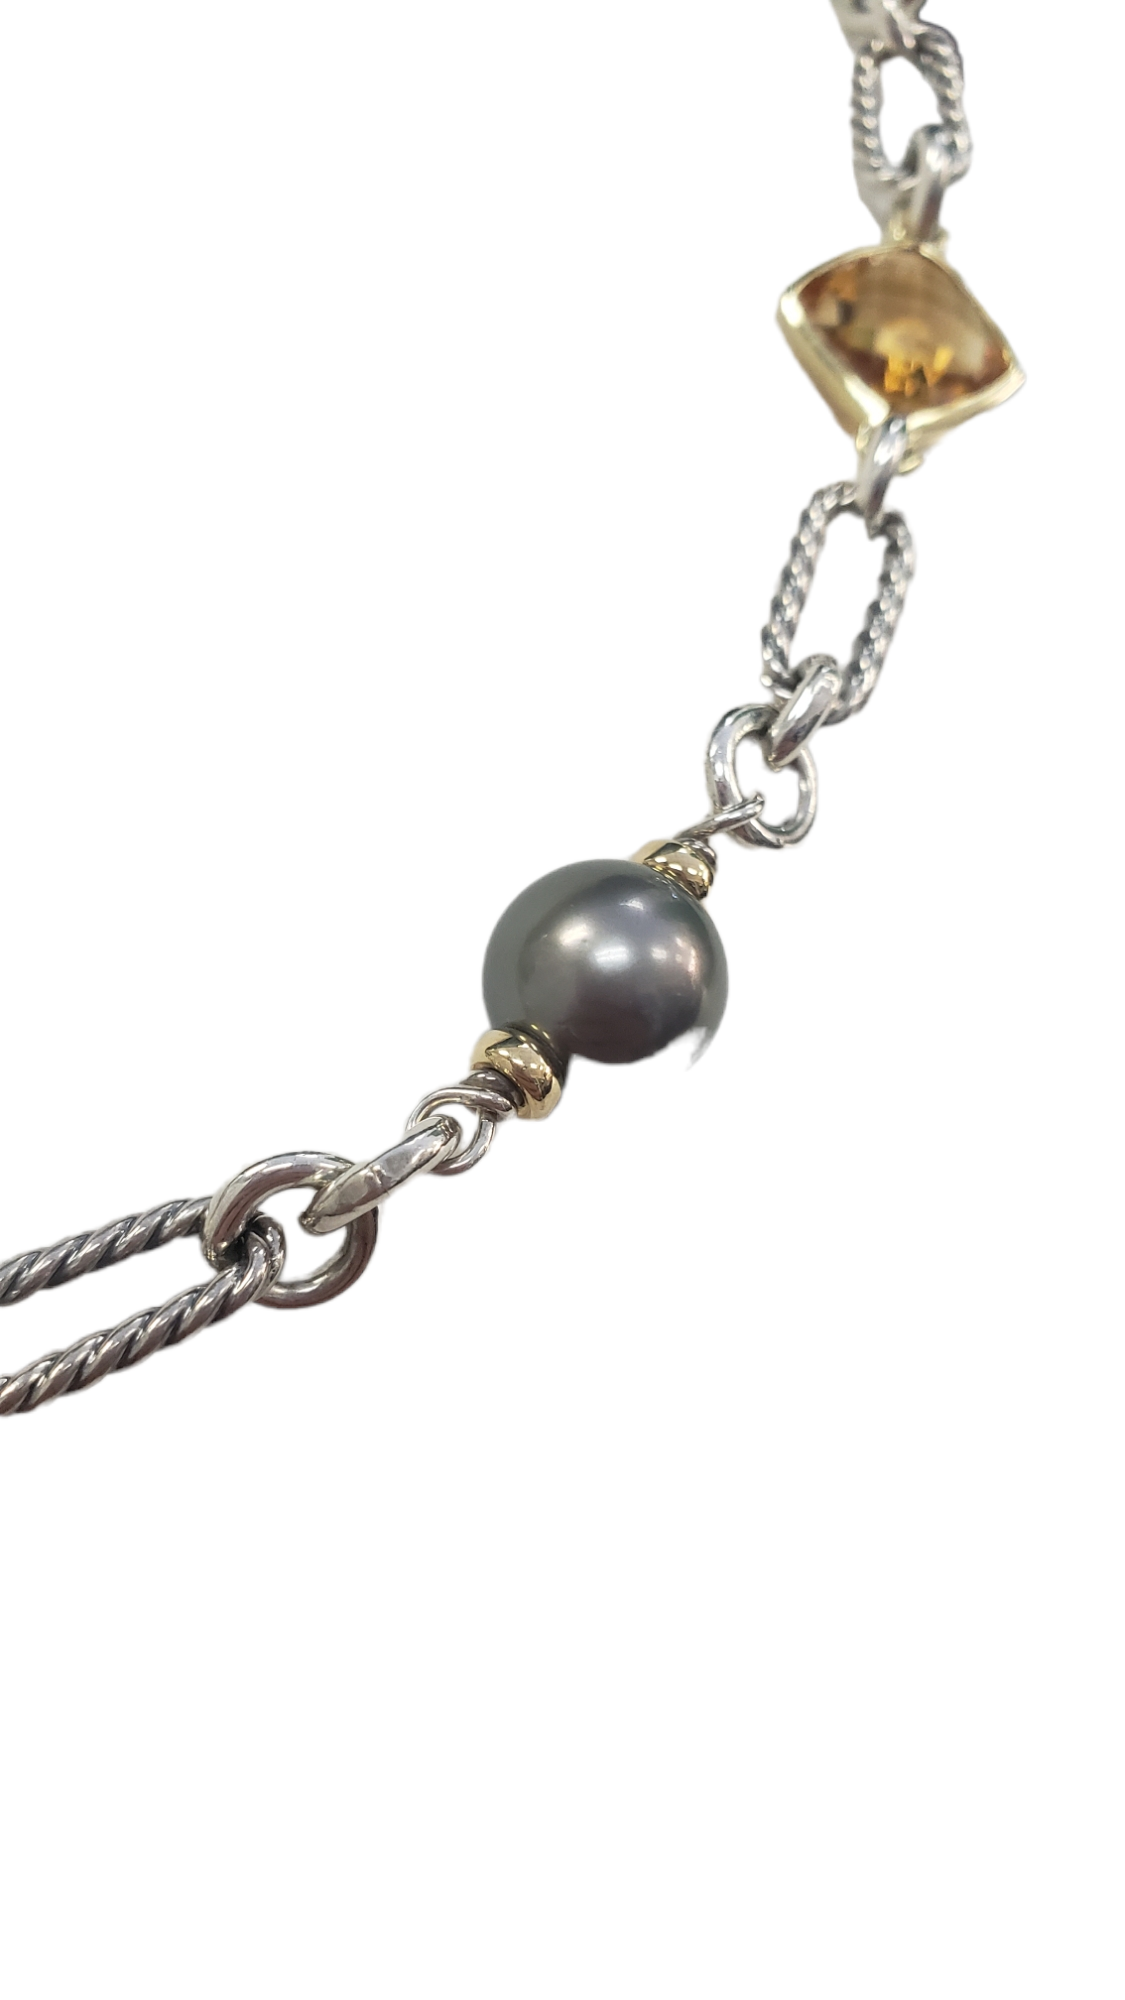 David Yurman Sterling Silver Pearl and Citrine Necklace